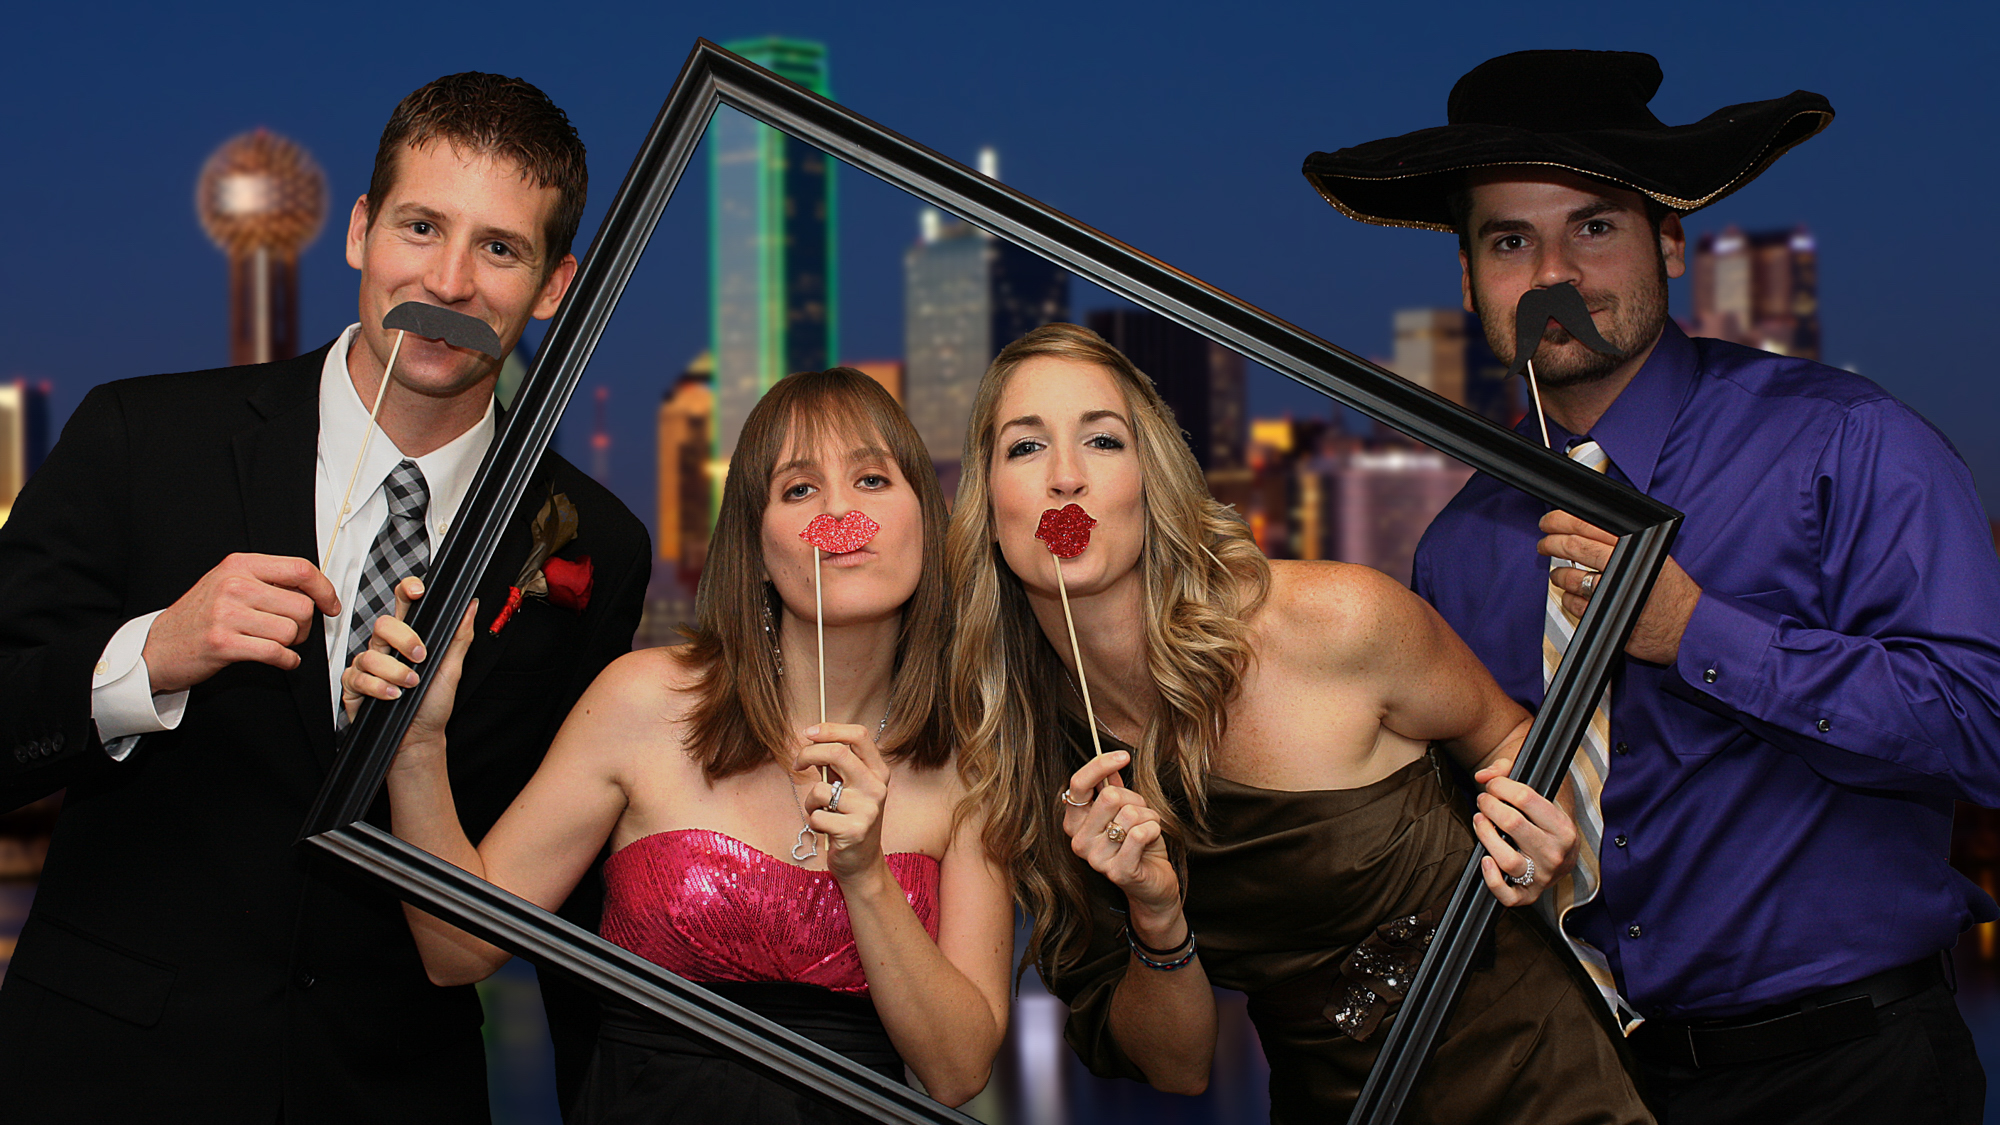 Friends pose for photography at a wedding in a digital sharing photosation. They are seen inside a picture frame with a green screen image of Dallas in the background.